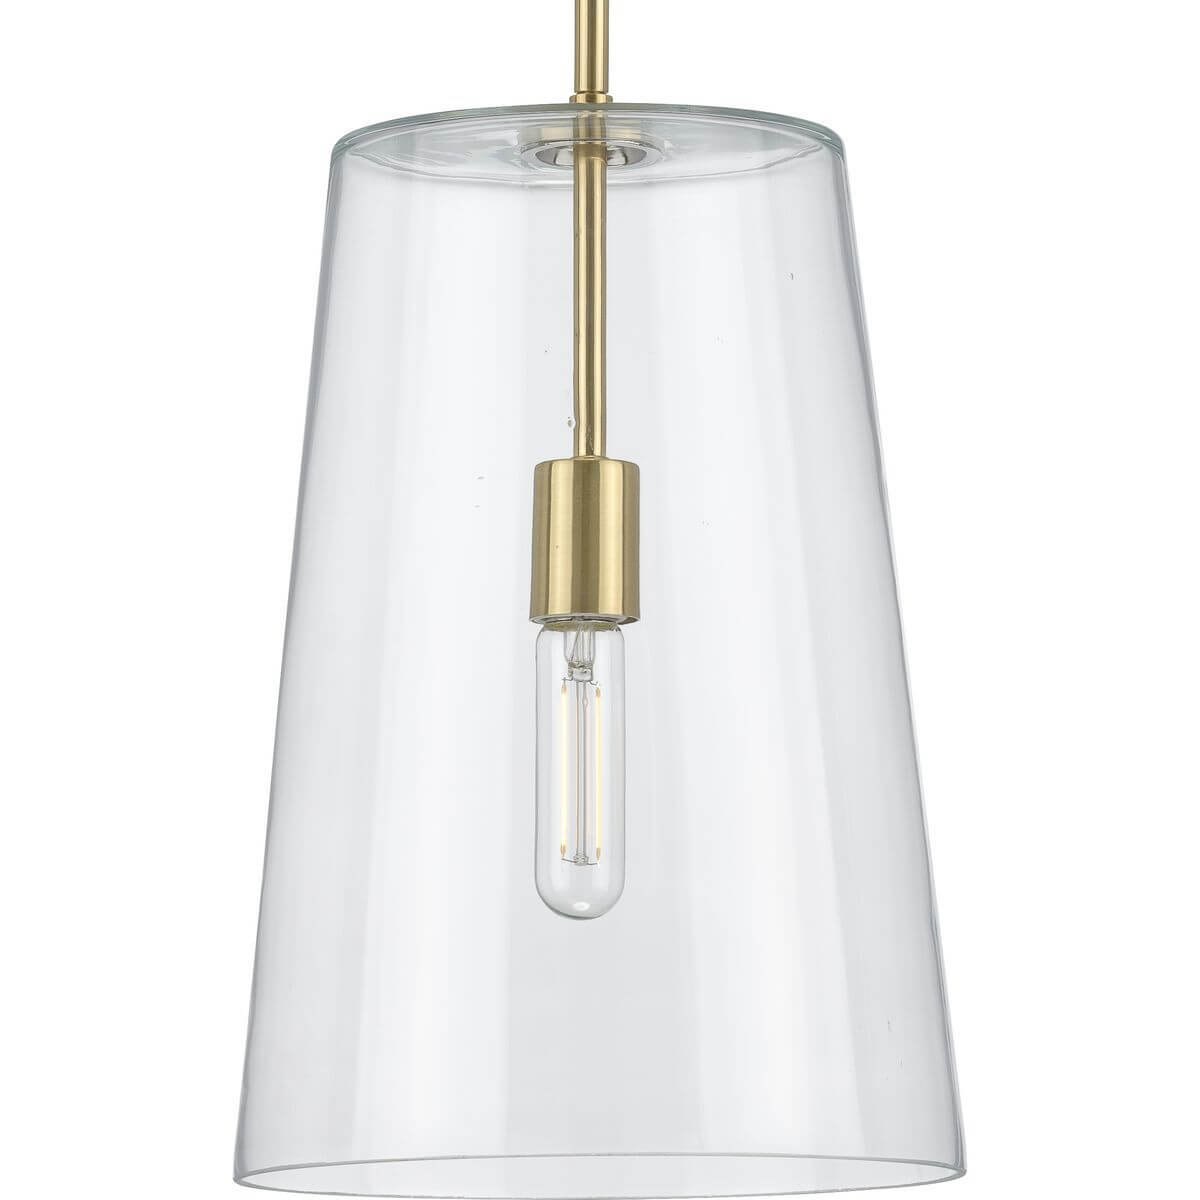 Progress Lighting Clarion 1 Light 11 inch Pendant in Satin Brass with Clear Glass P500242-012